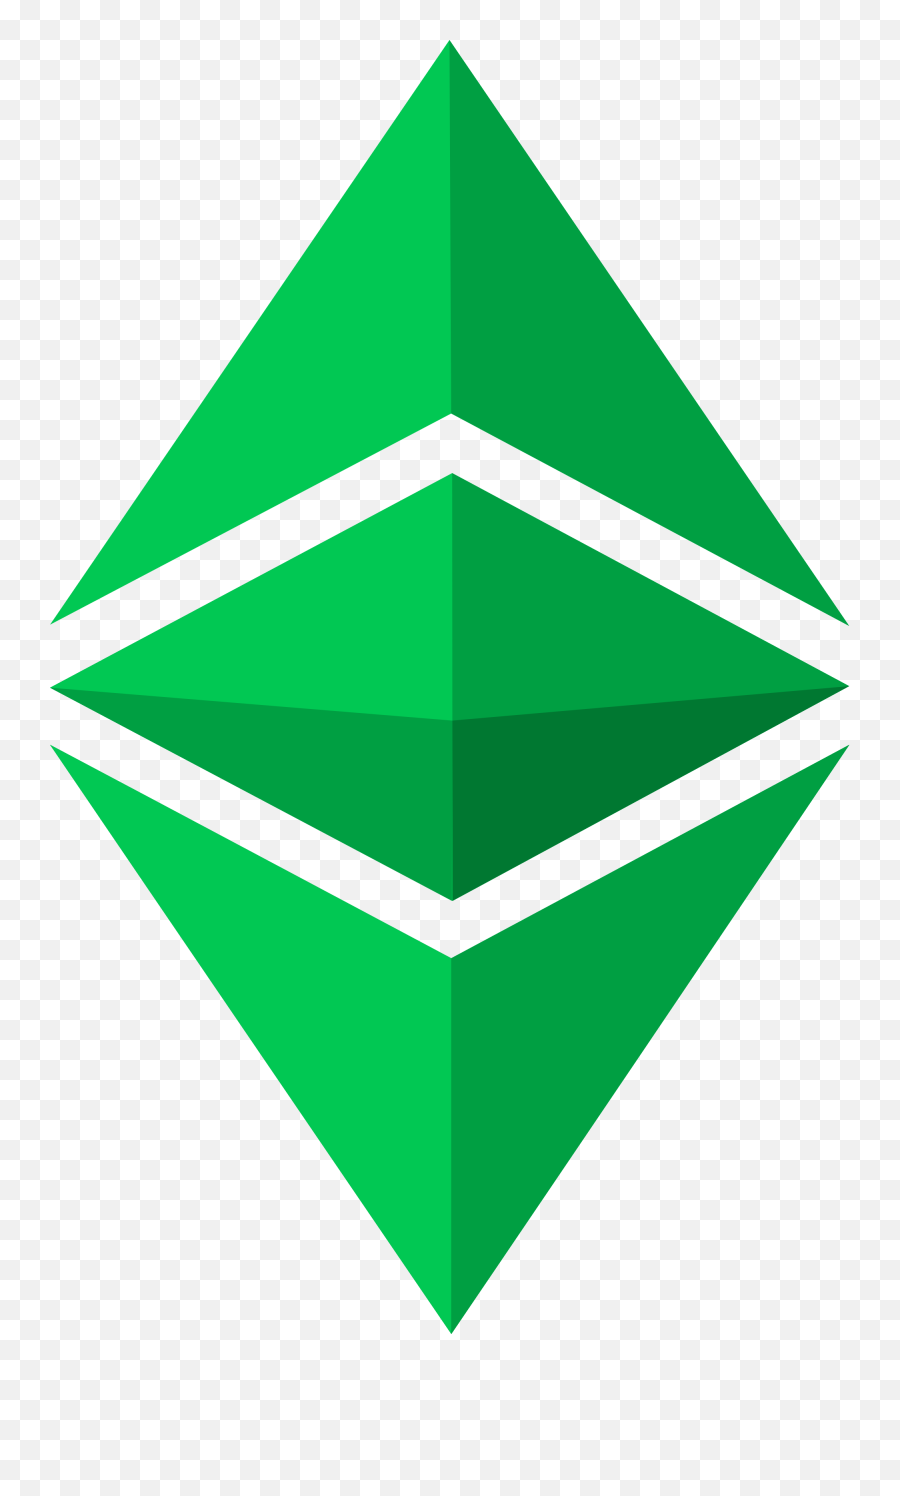 Fileethereum Classic Logosvg - Wikiped 2390560 Png Ethereum Classic Logo Svg Emoji,Classic Logo